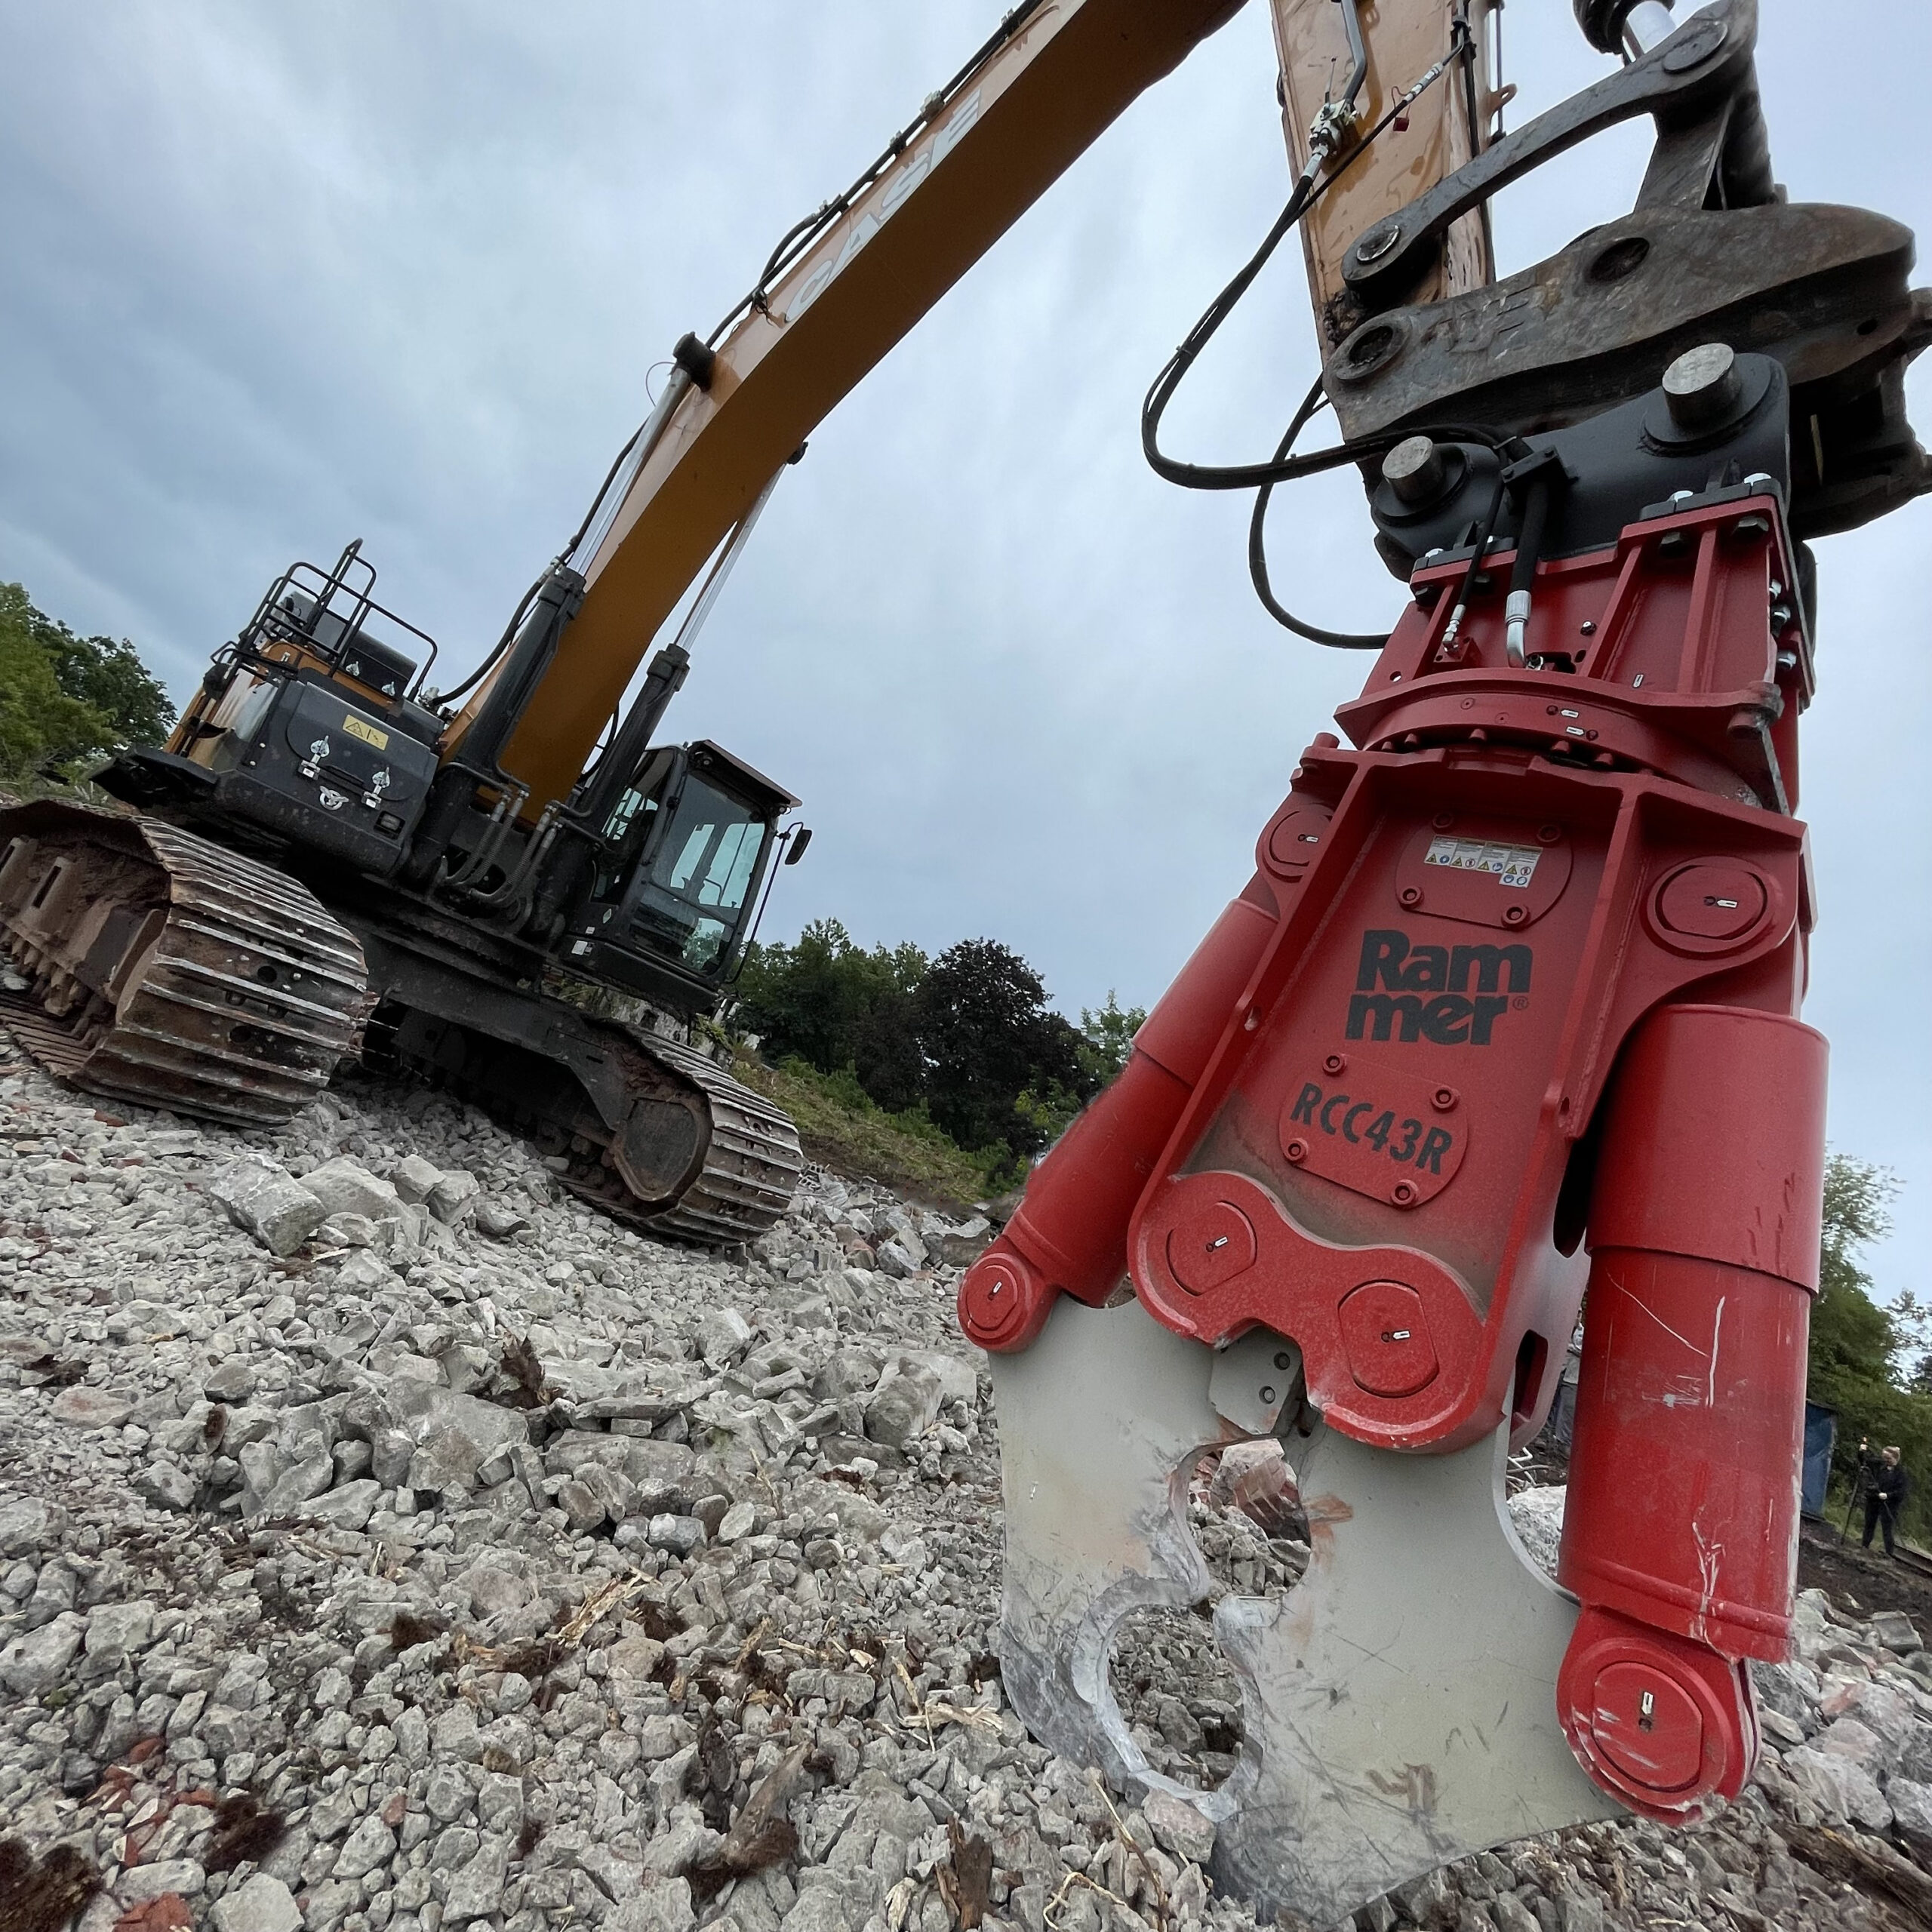 Monster Demolition Cutters For This CASE Excavator